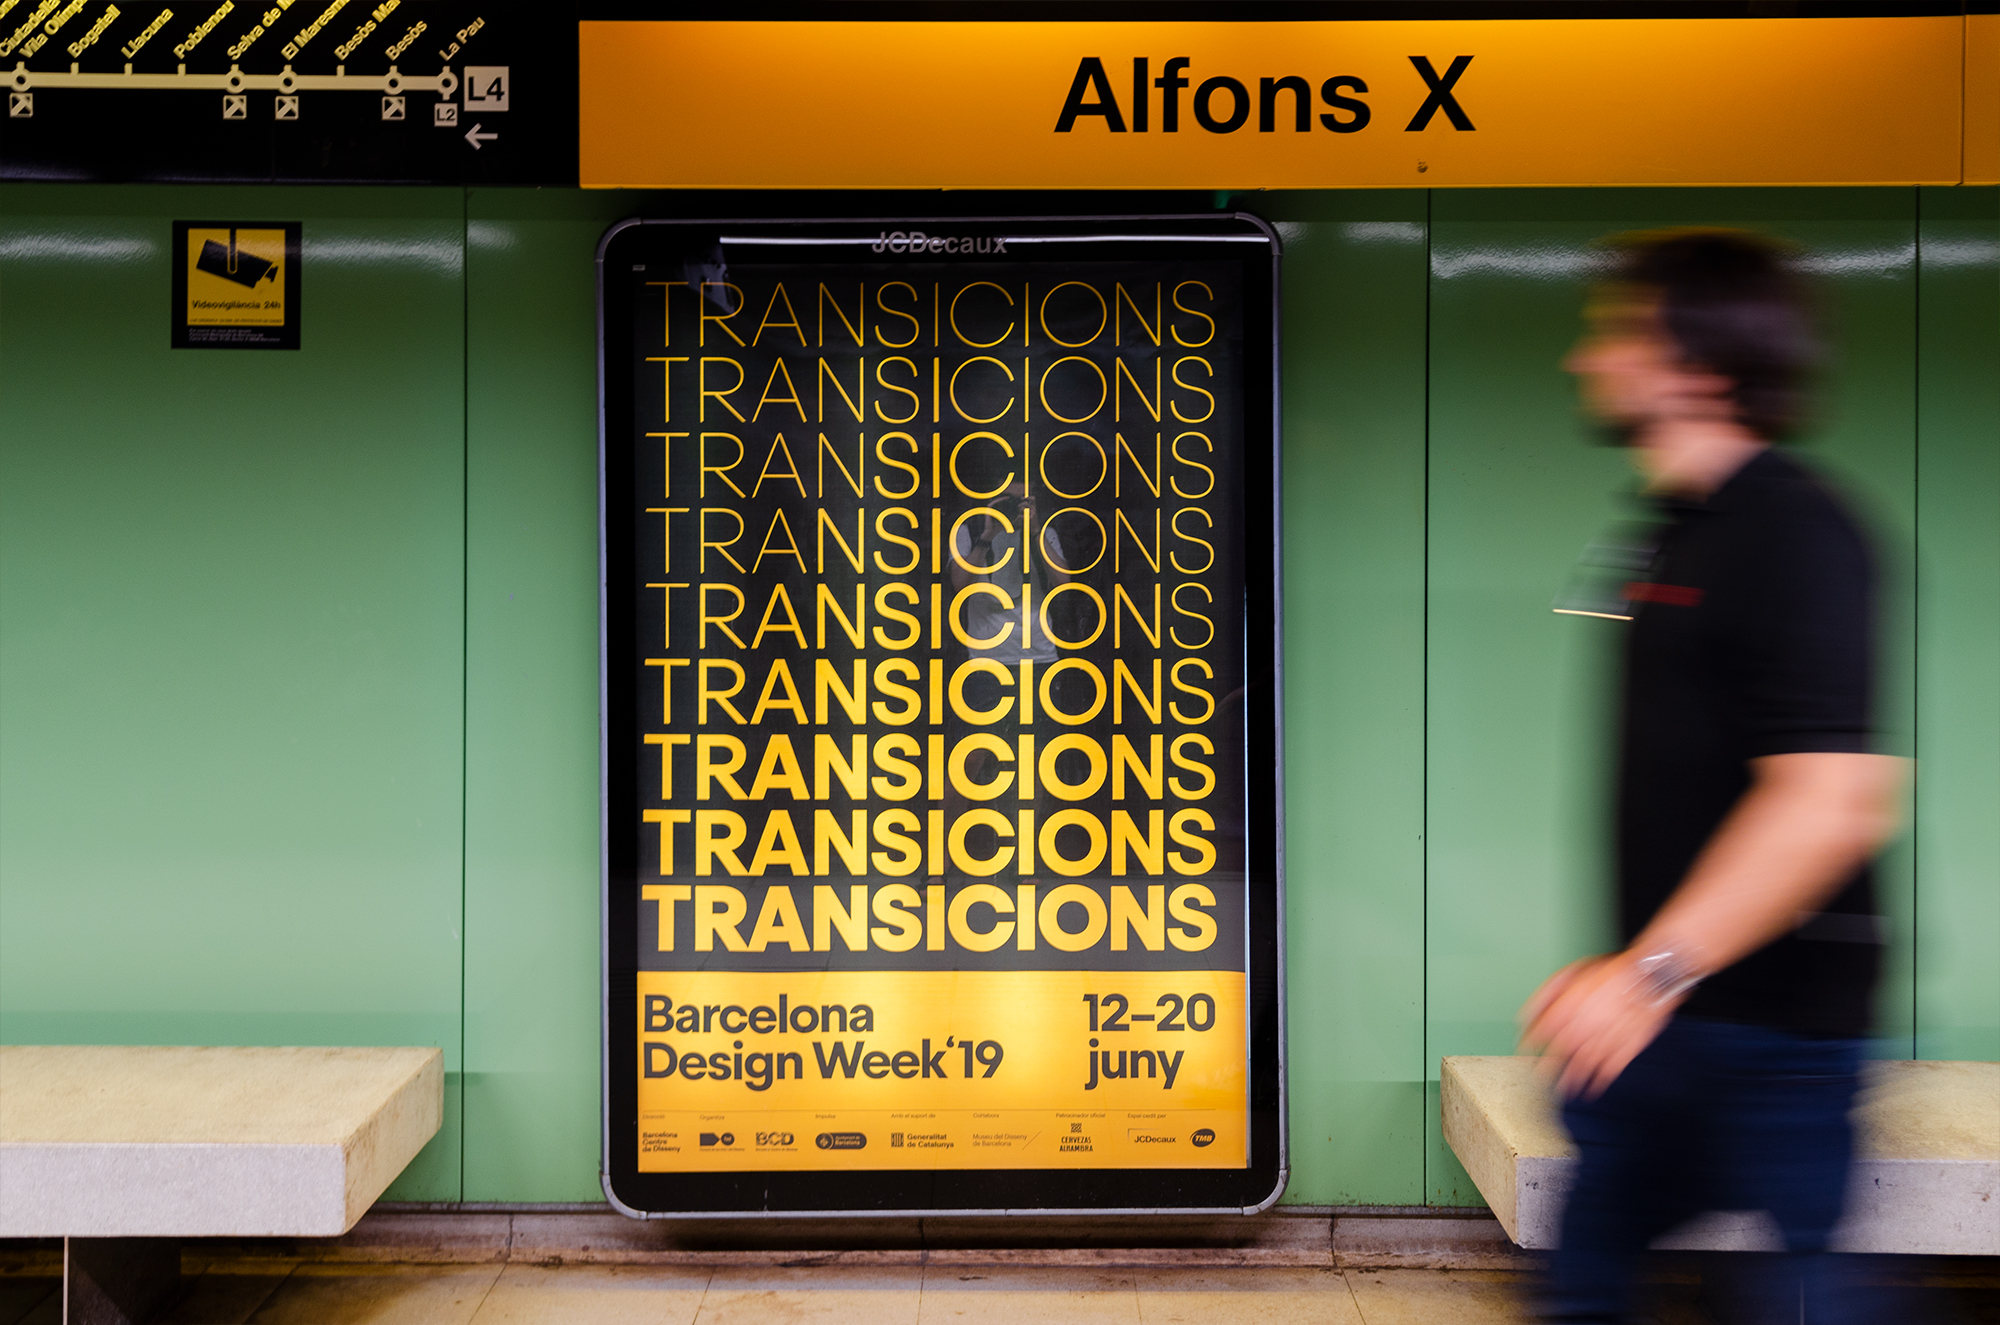 New Identity for Barcelona Design Week 2019 by ESIETE